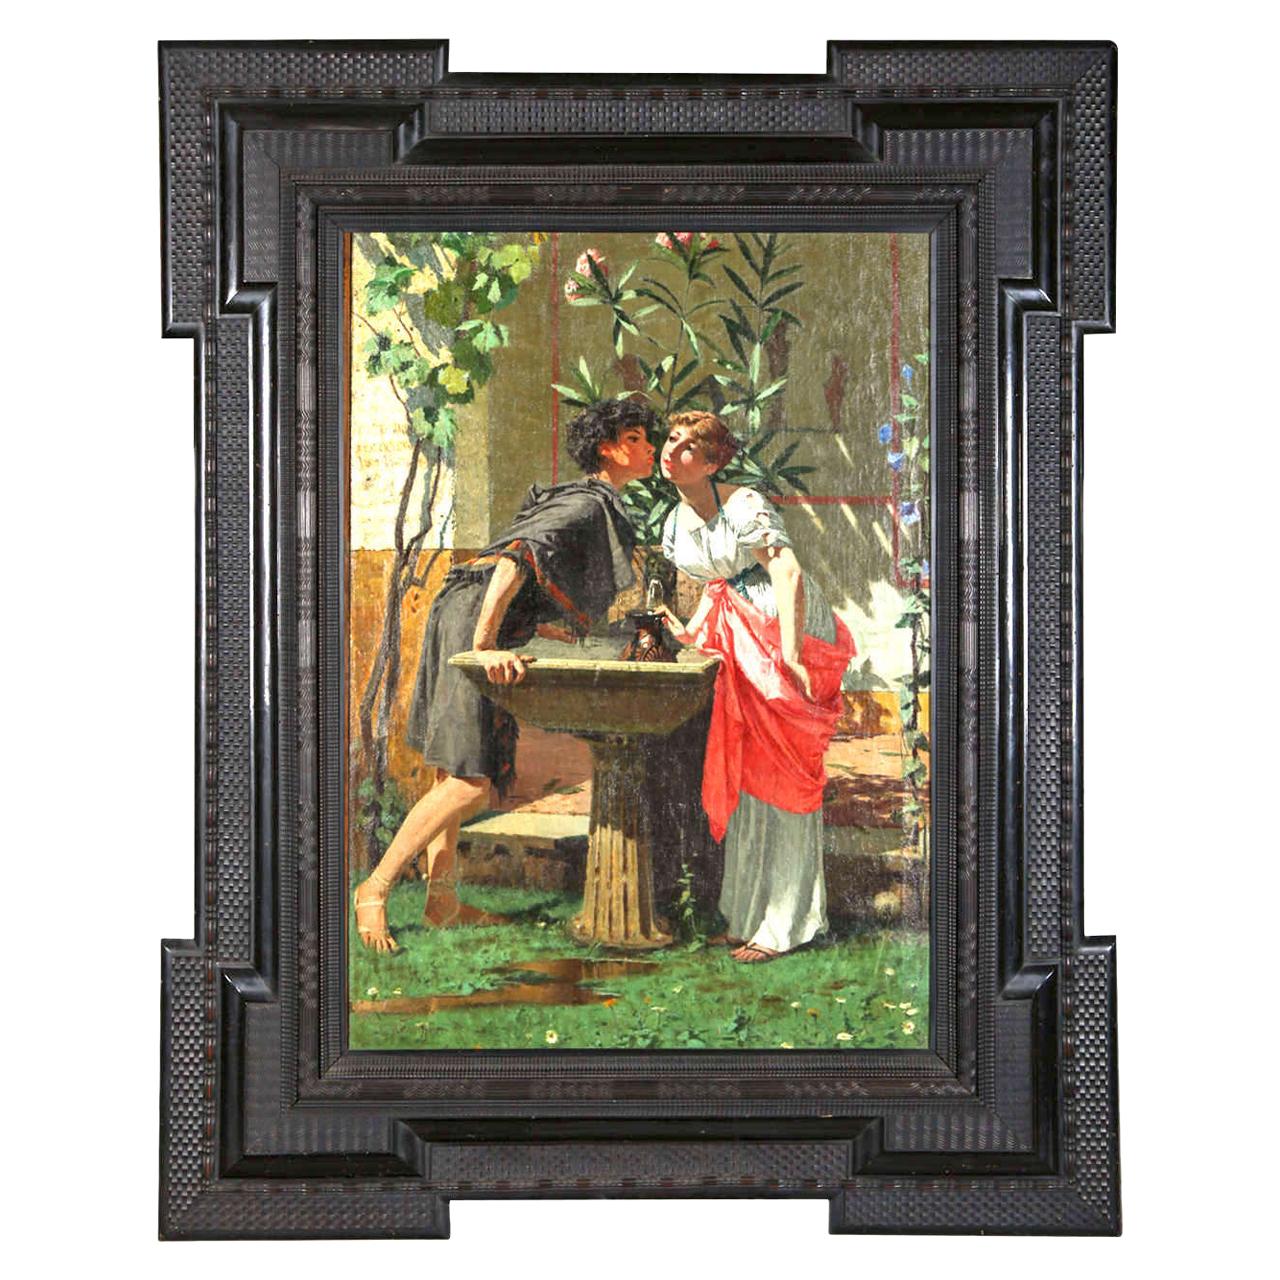 Lovers by a Fountain 19th Century Painting Oil on Canvas, Modesto Faustini, 1860